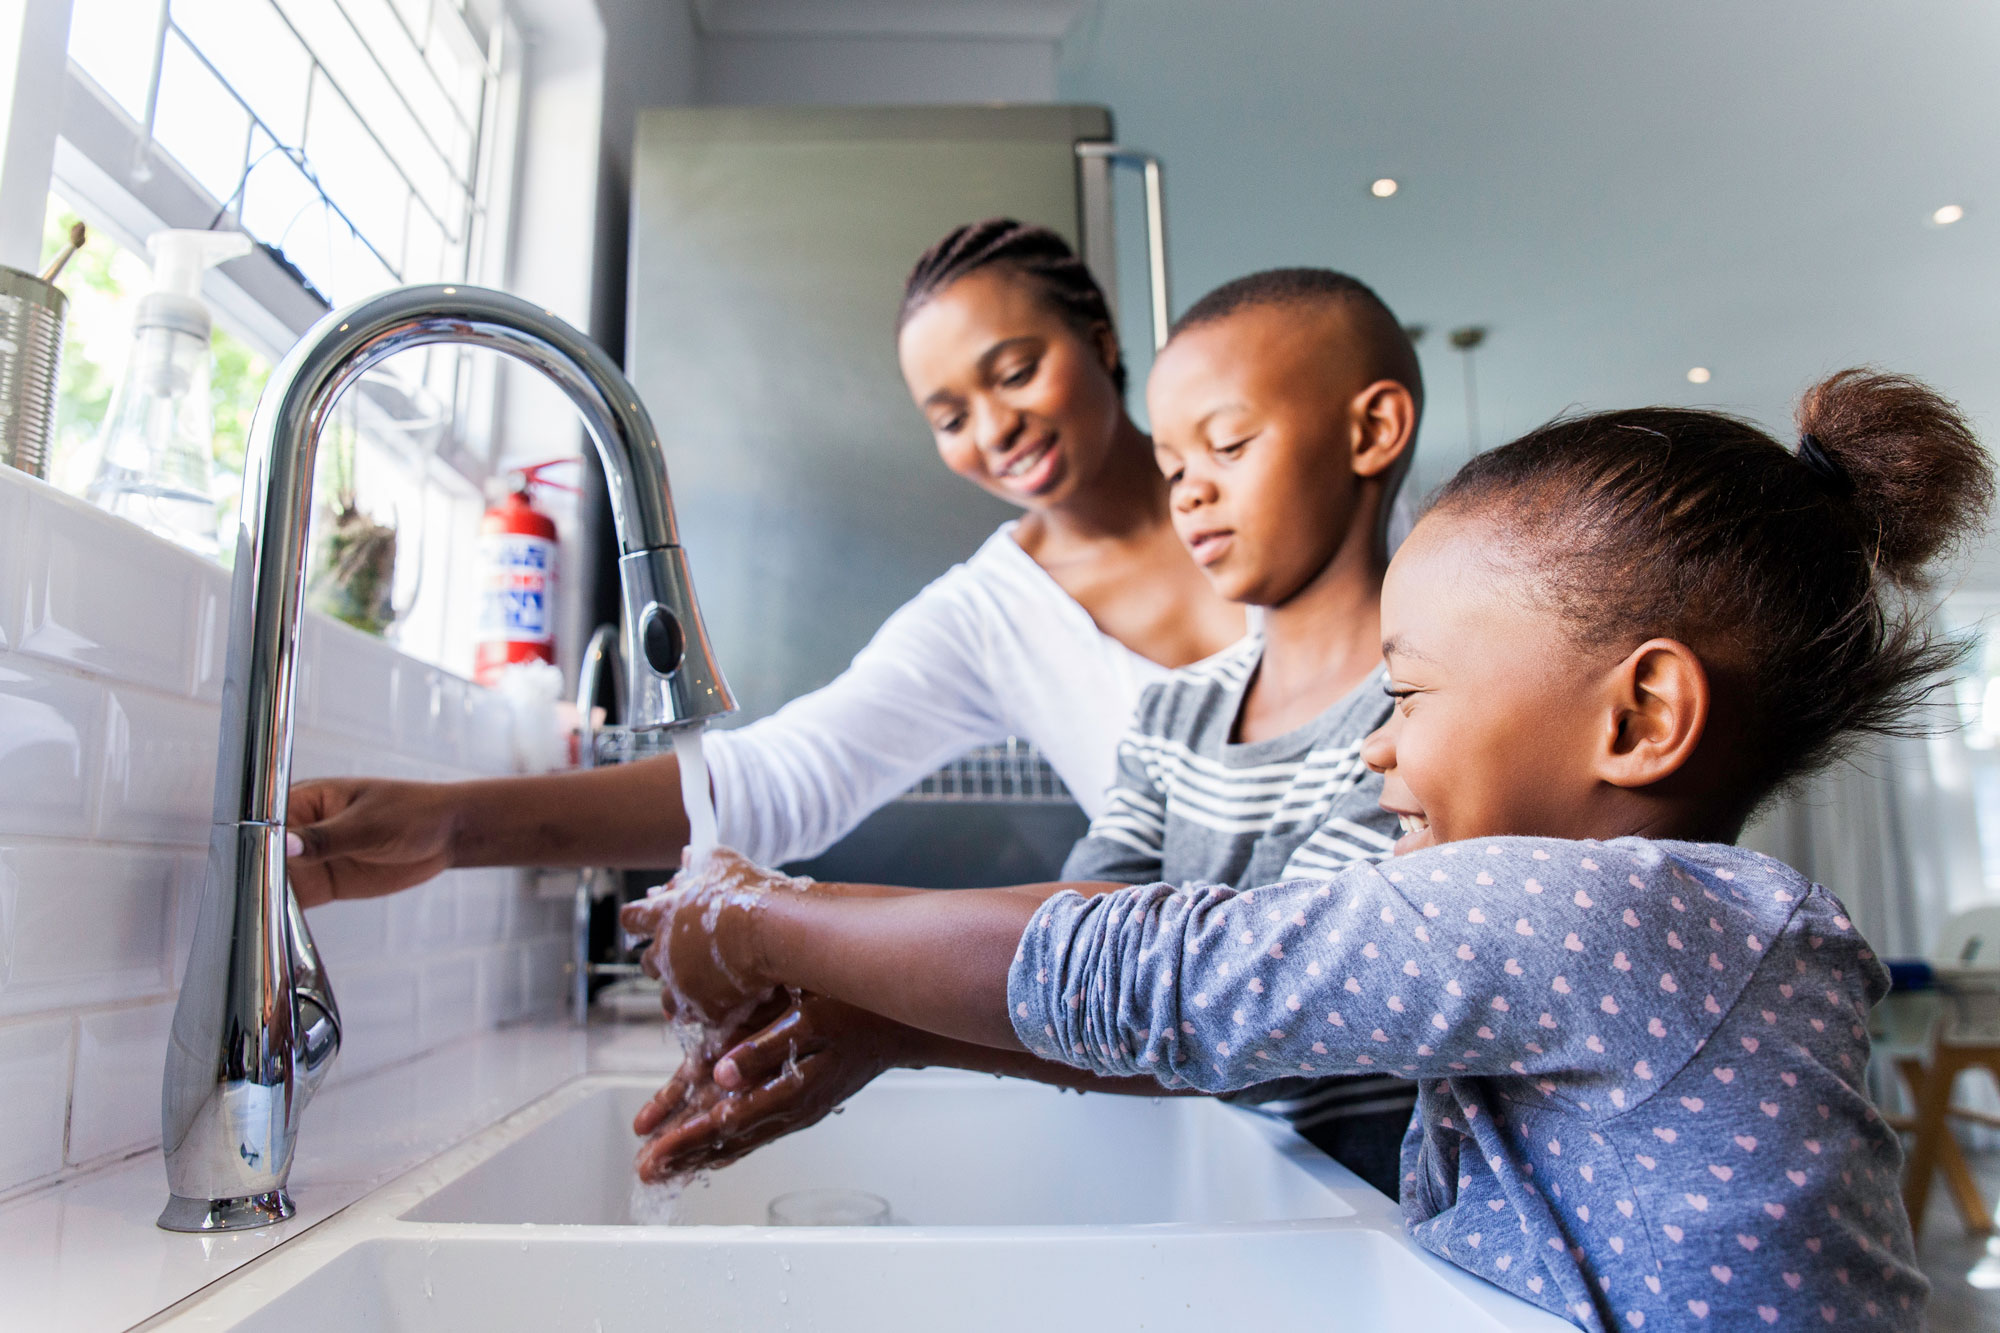 photo - Family Washing Their Hands Together at Kitchen Sink